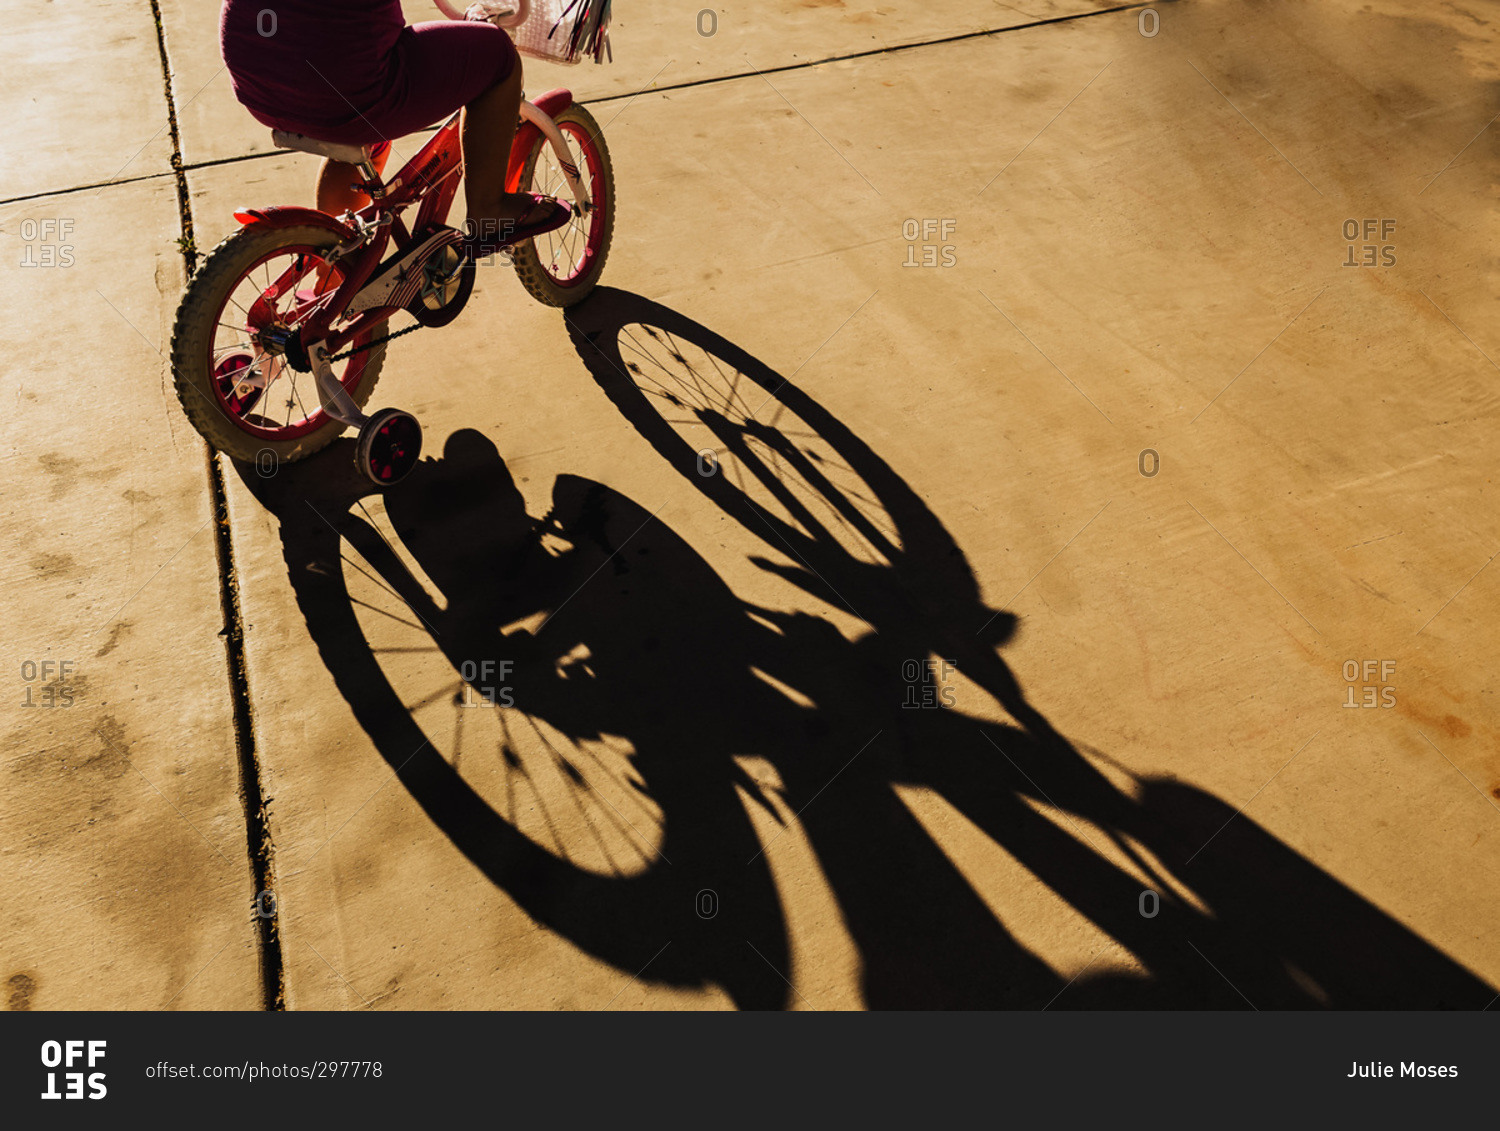 Shadow of young girl riding a bicycle with training wheels